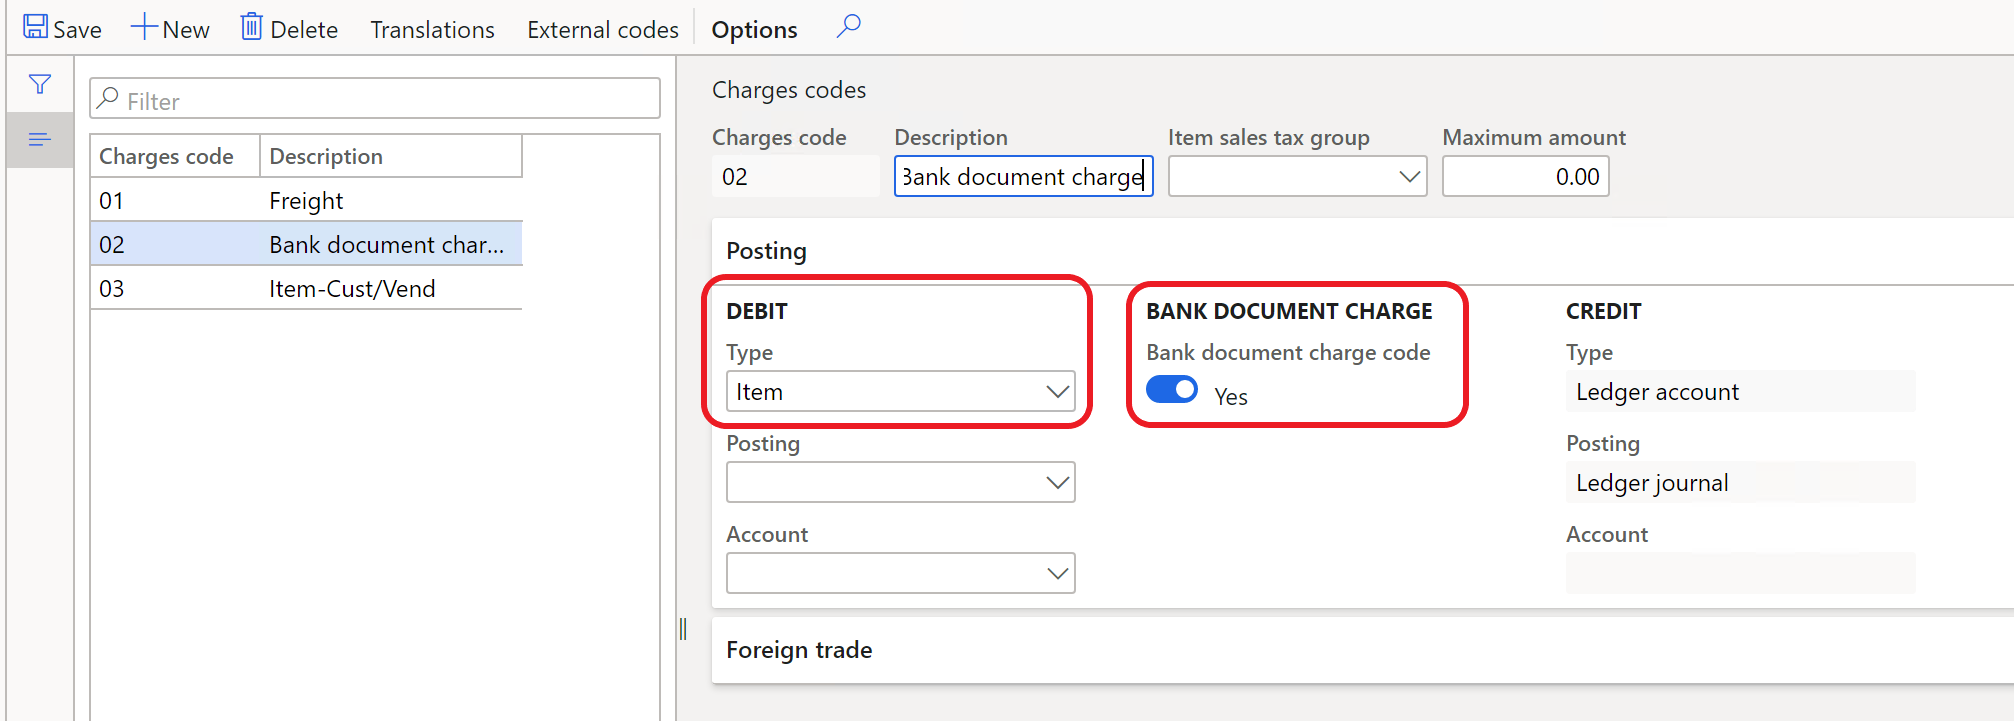 Setting up a charge code for bank document charges.